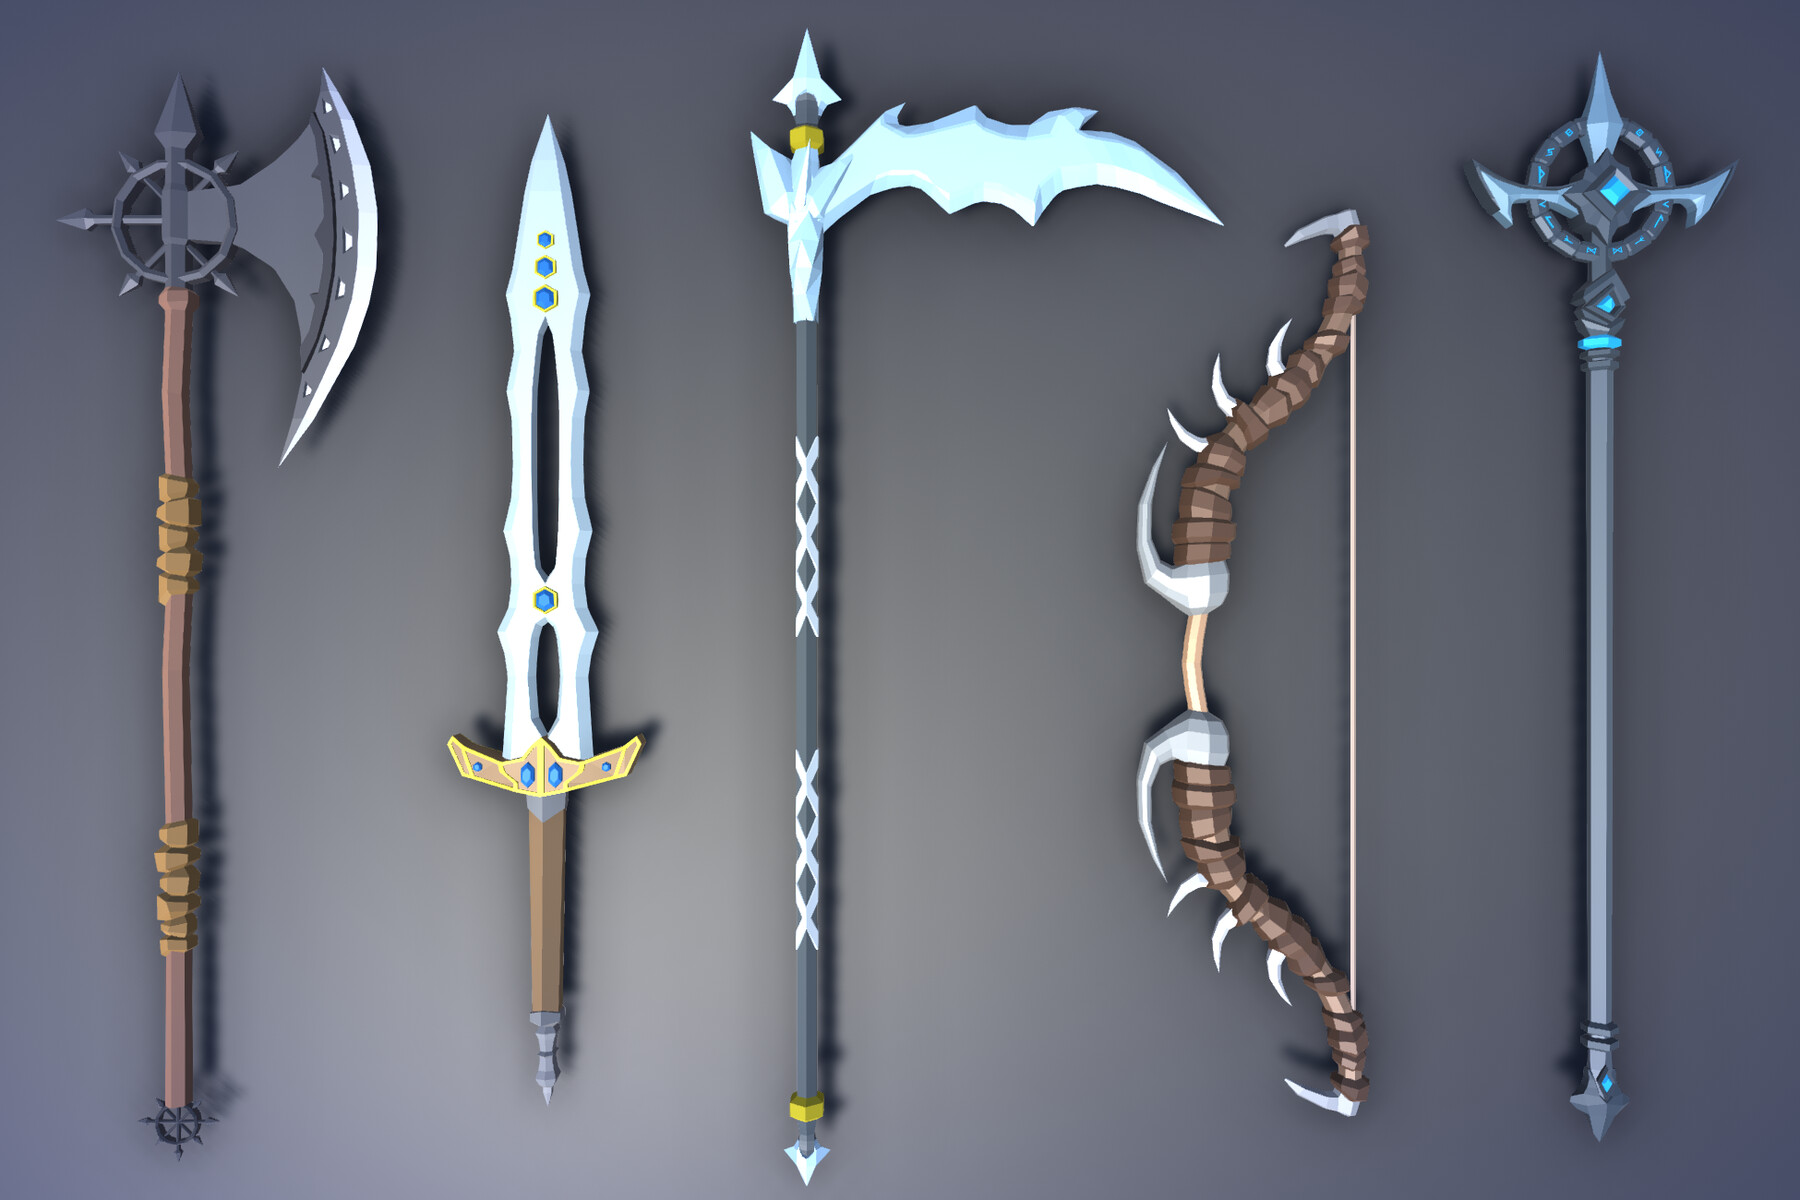 Fantasy Weapon Pack 1 in Weapons - UE Marketplace